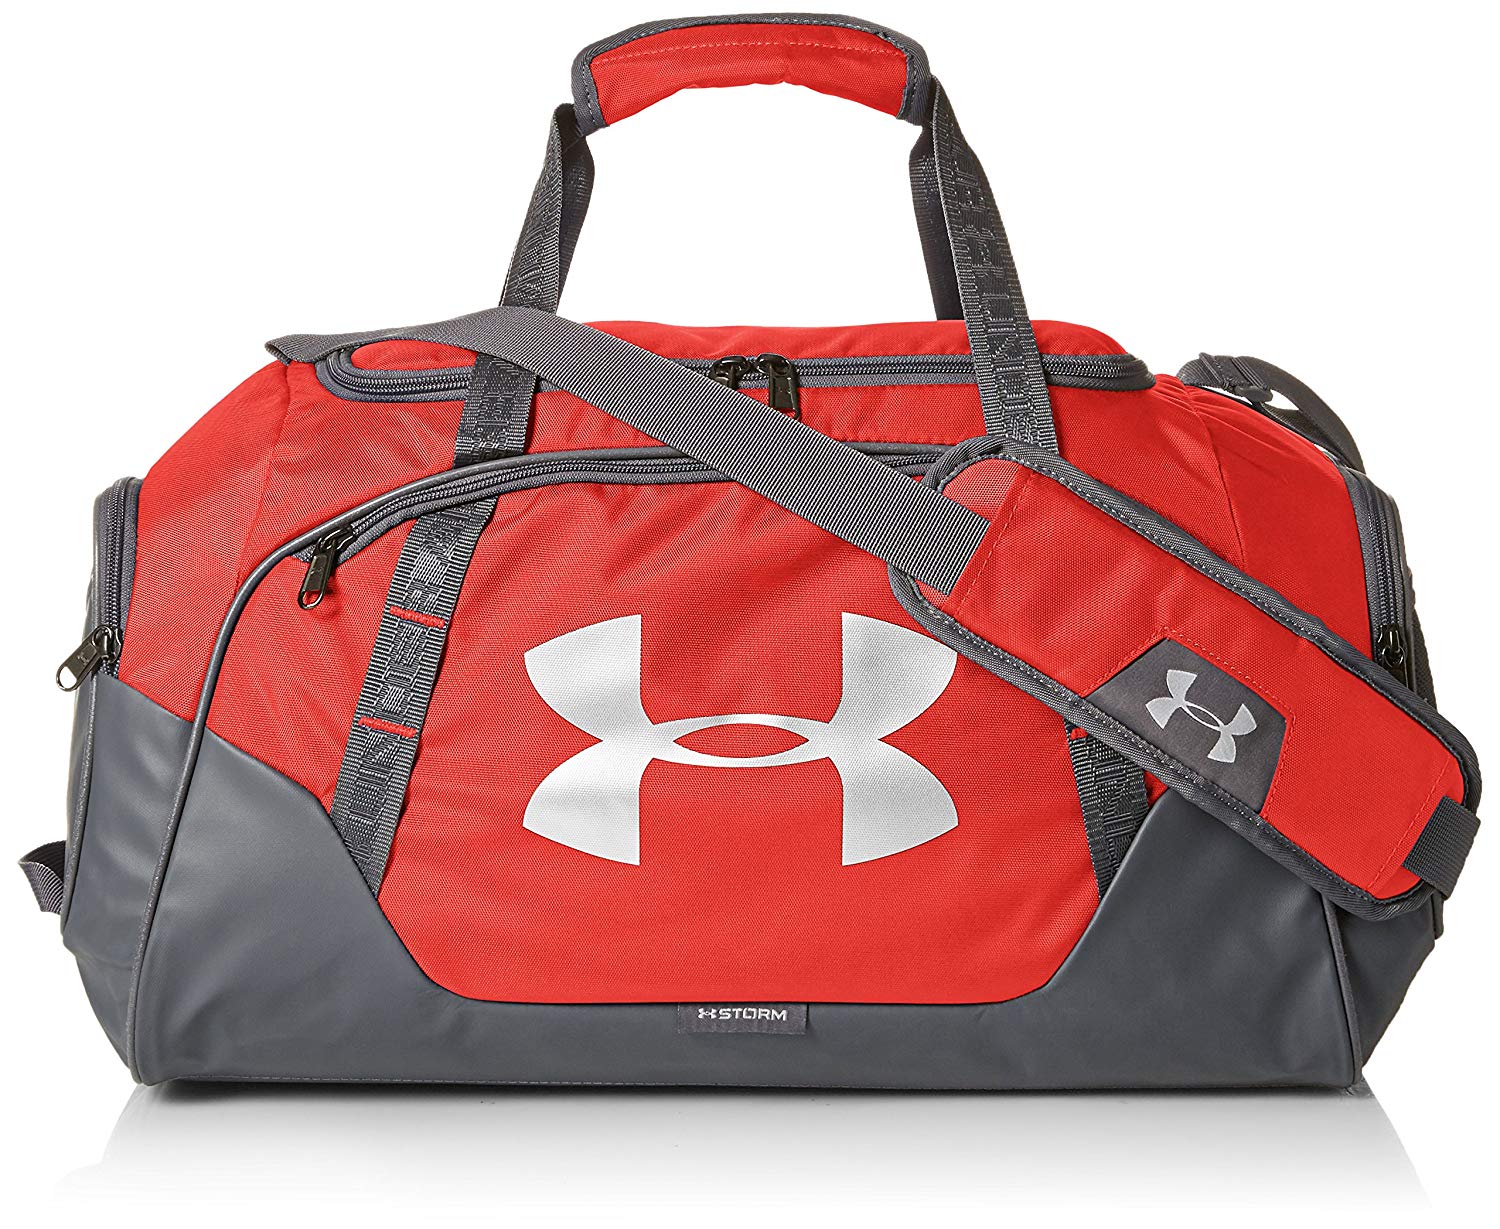 Under Armour Undeniable 3.0 Duffle